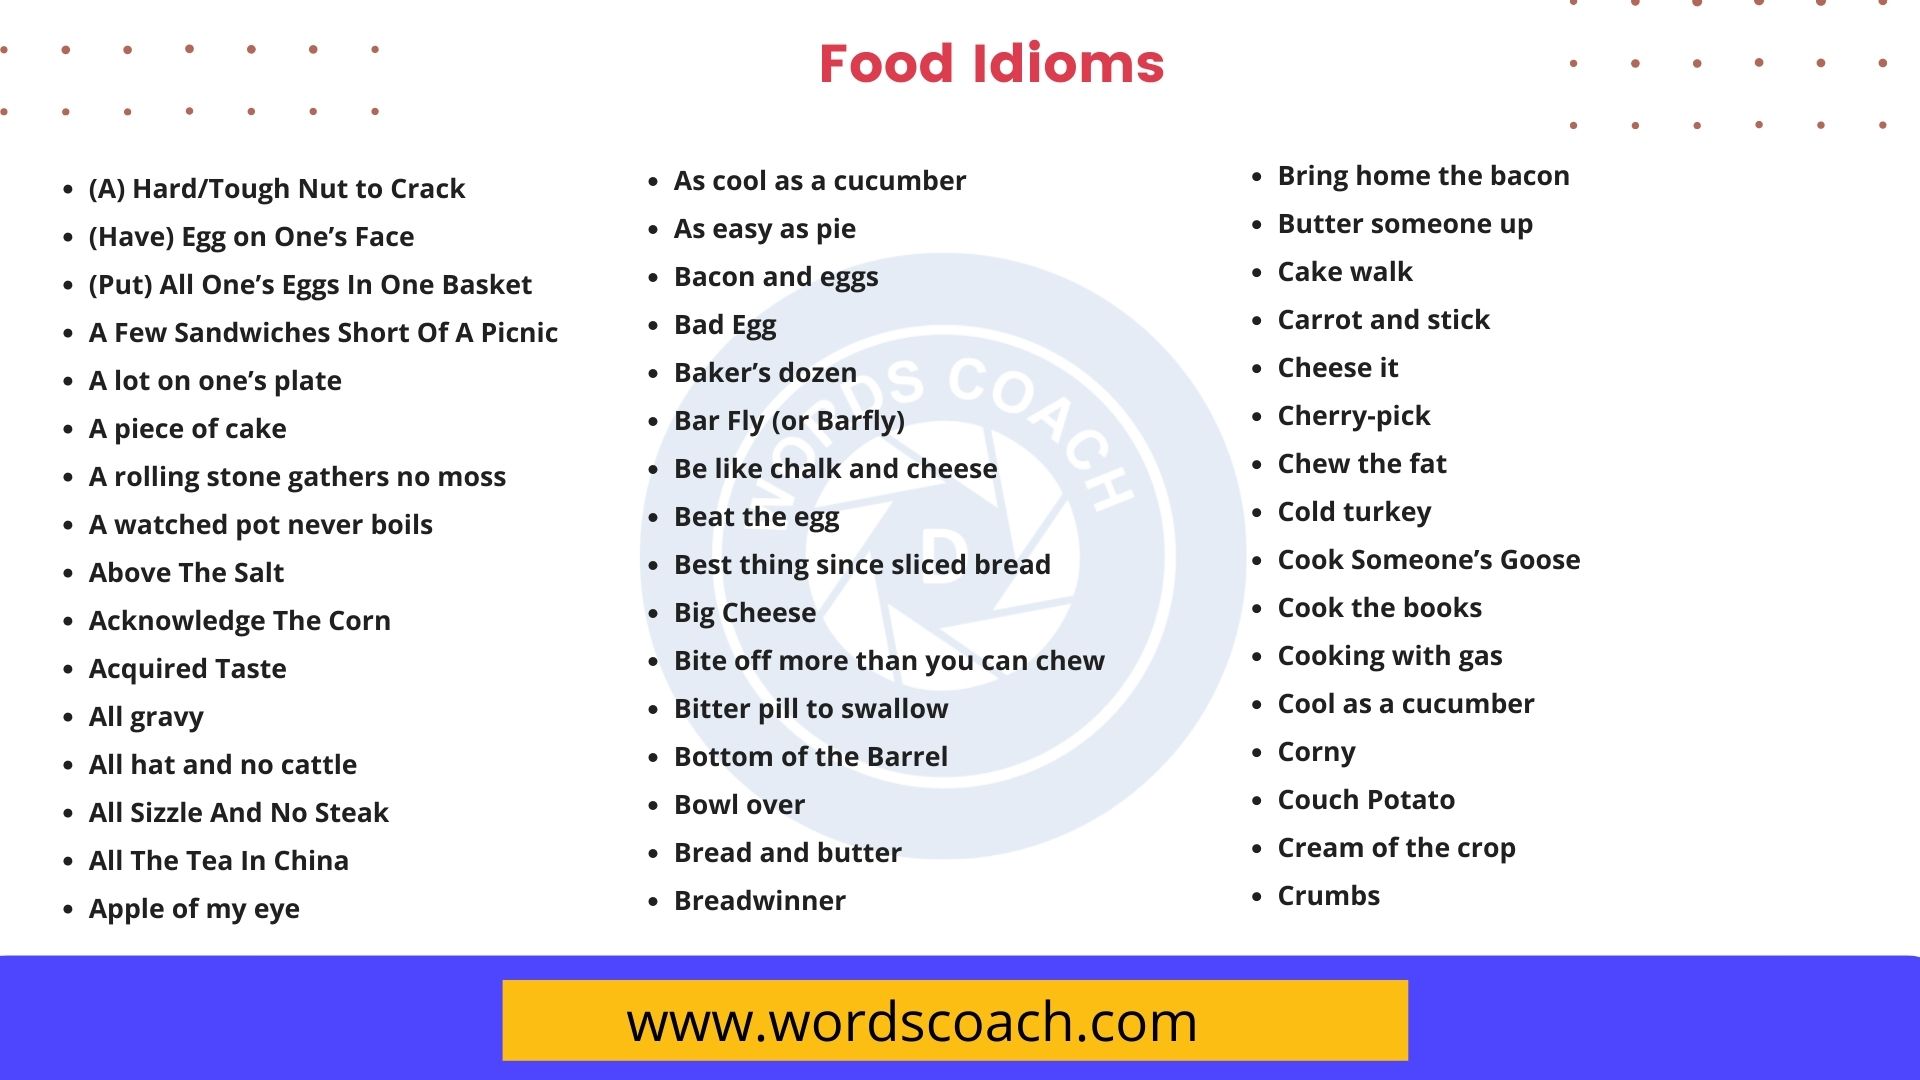 https://www.wordscoach.com/blog/wp-content/uploads/2023/03/Food-Idioms-with-Meaning-and-Examples-wordscoach.com_.jpg